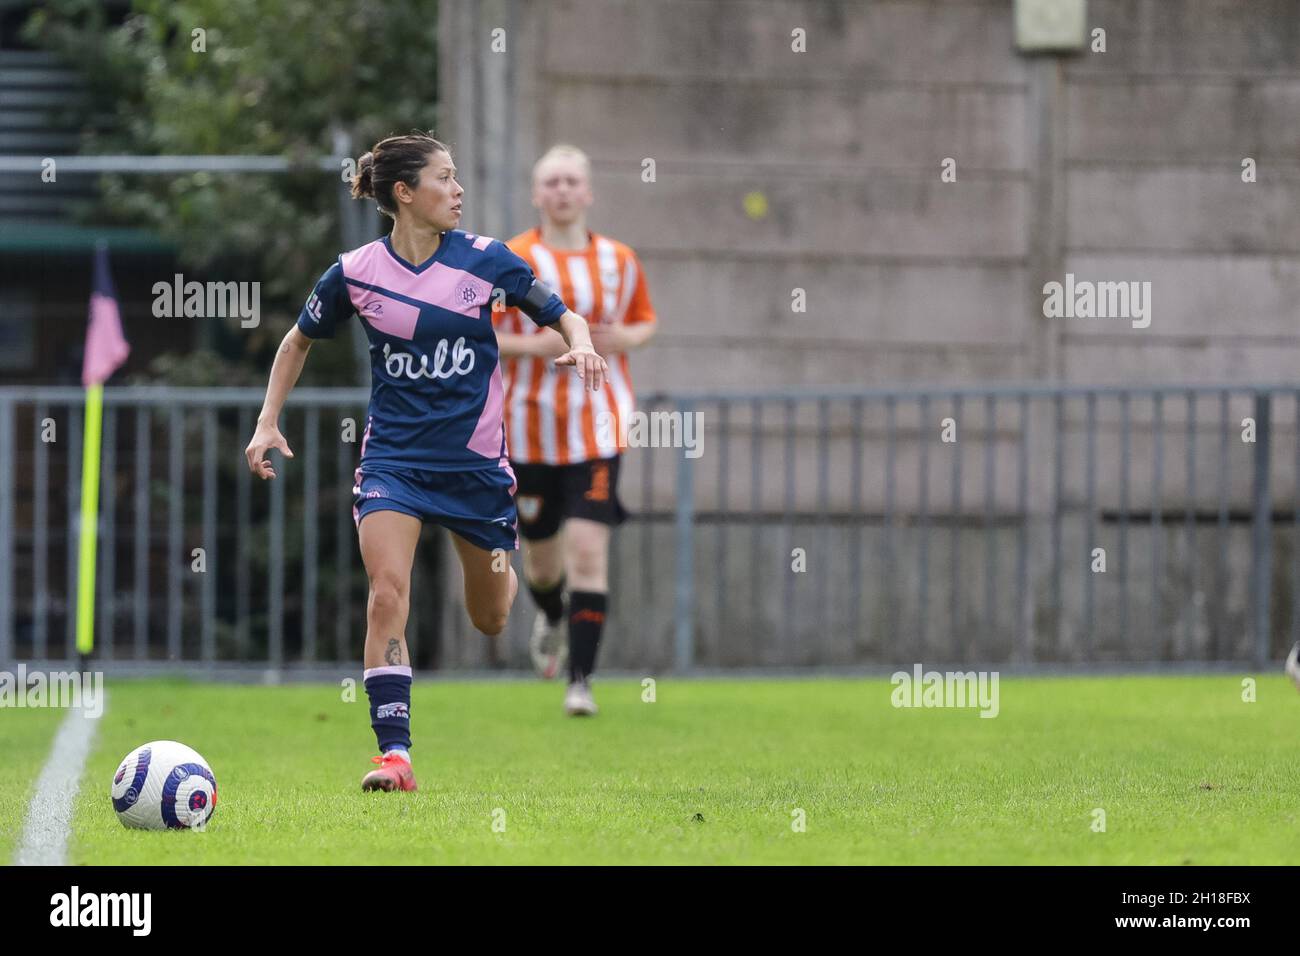 London, UK. 17th Oct, 2021. London, England, October 17th 20 Lucy Monkman (14 Dulwich Hamlet) in action at the London and South East Regional Womens Premier game between Dulwich Hamlet and Ashford at Champion Hill in London, England. Liam Asman/SPP Credit: SPP Sport Press Photo. /Alamy Live News Stock Photo